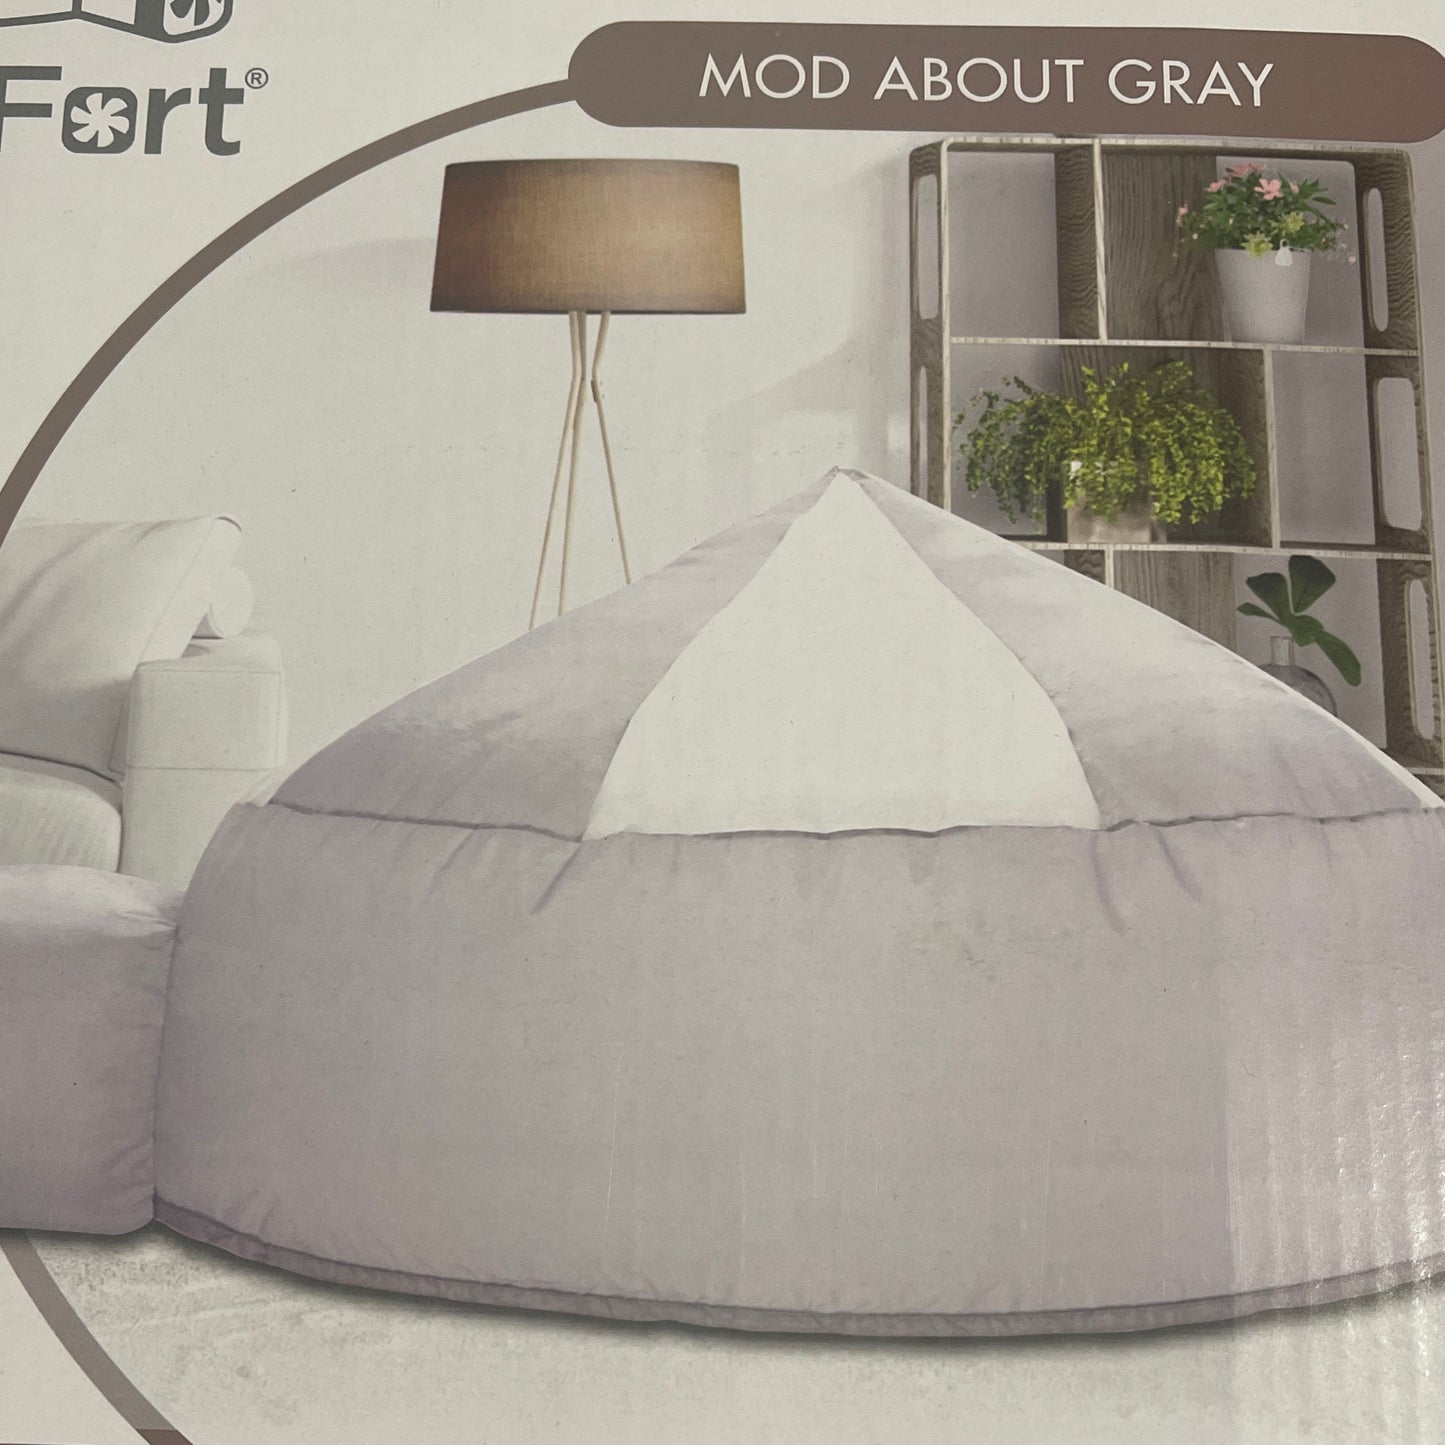 The Original Airfort: Mod About Gray